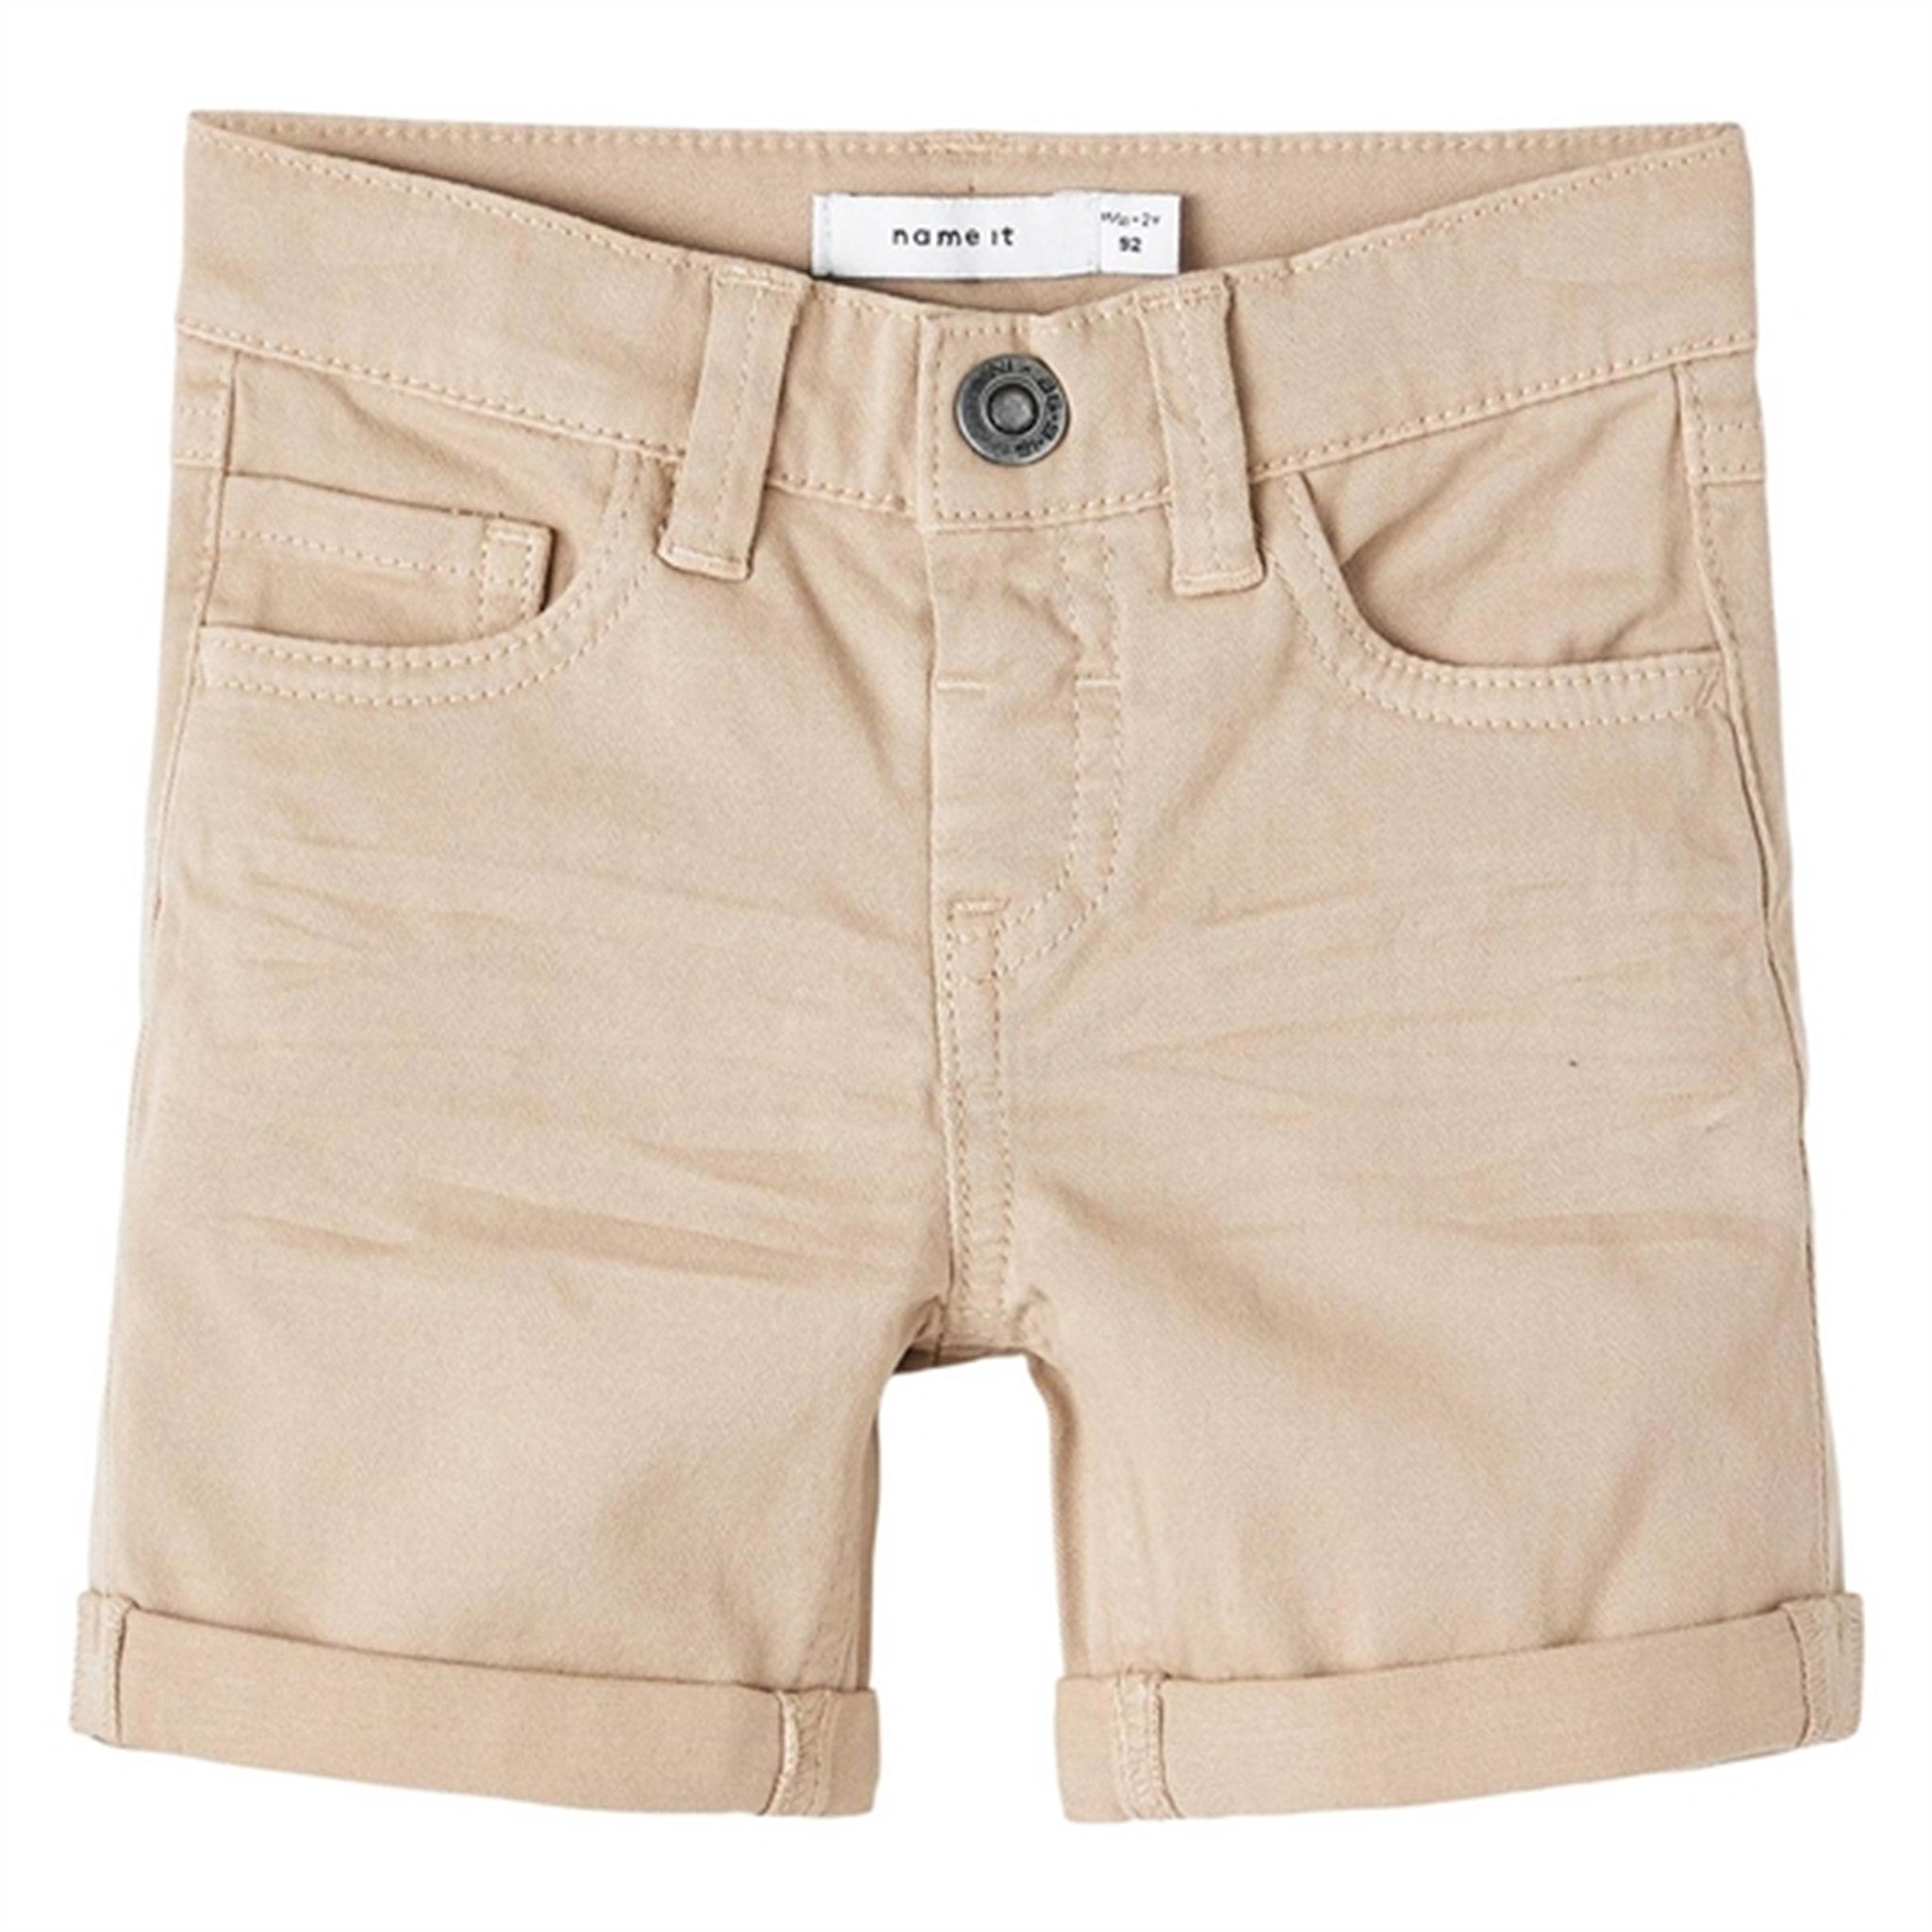 Name it Incense Sofus Twill Shorts